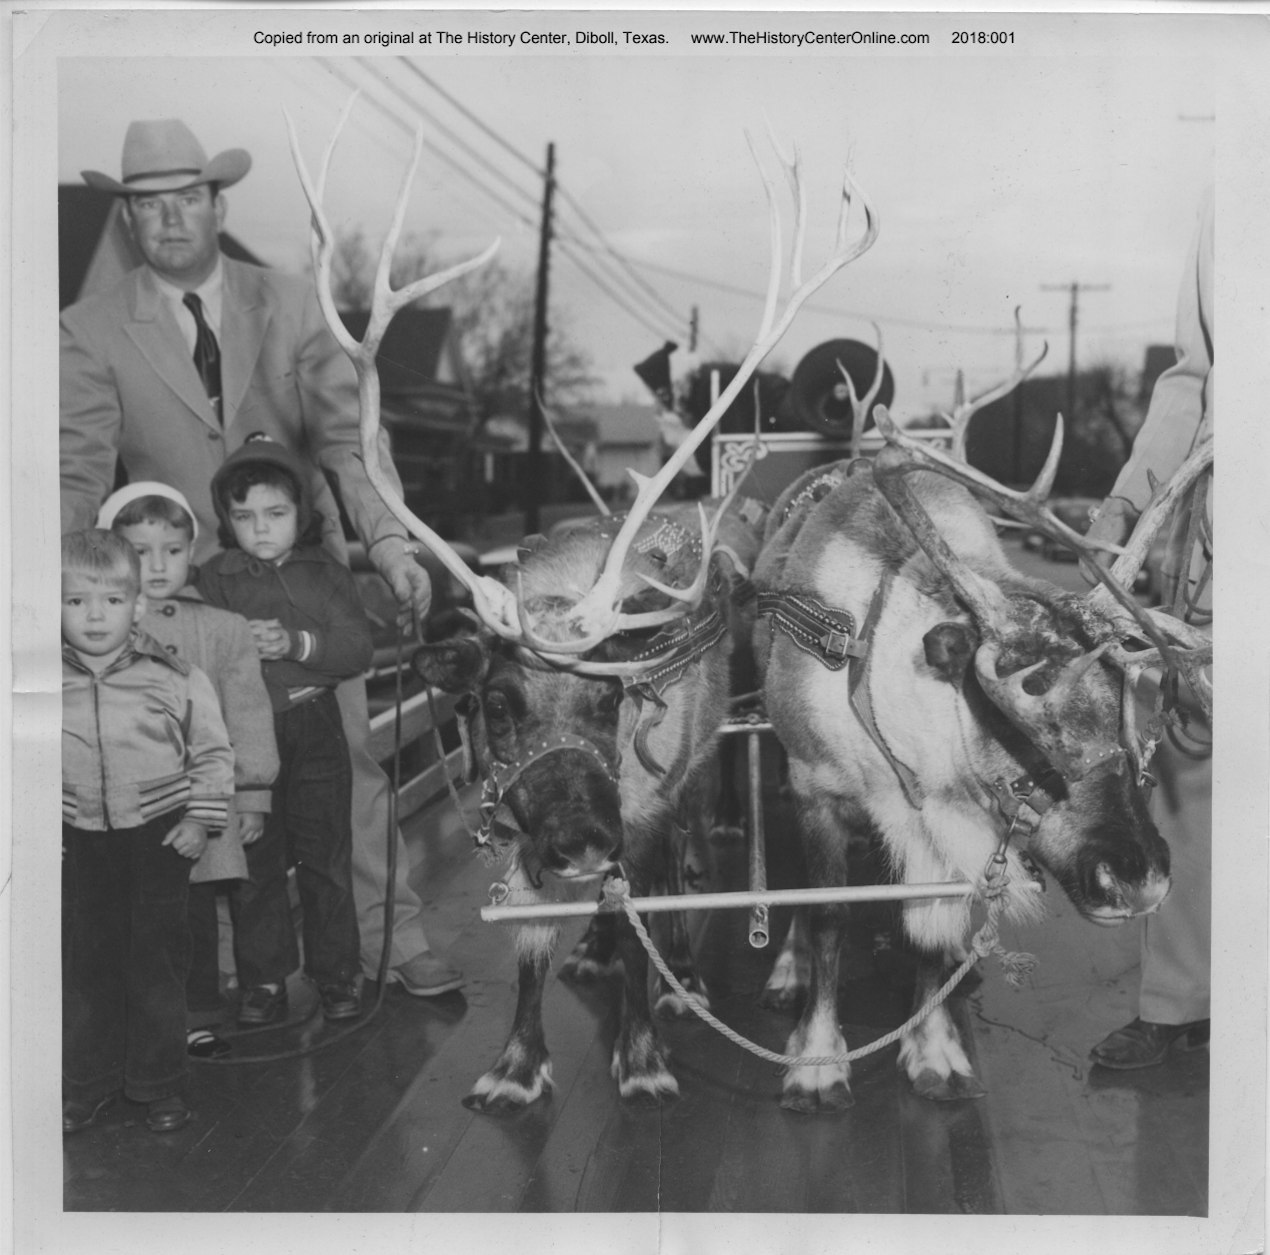 Live Reindeer in Lufkin Christmas Parade, Undated The History Center